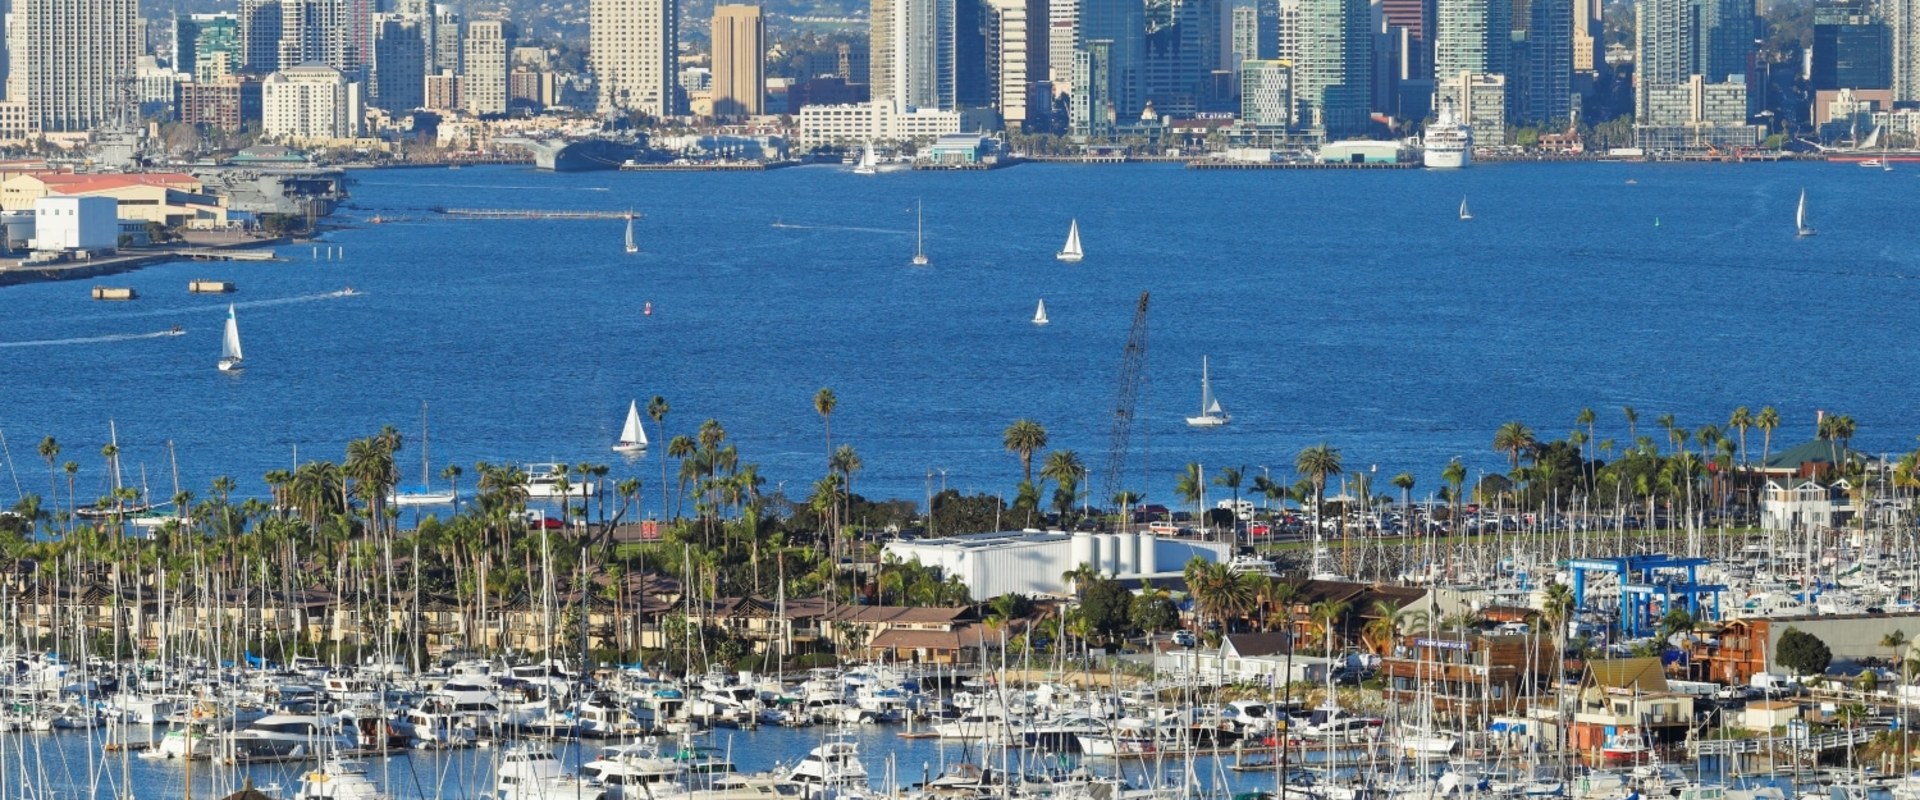 Is san diego the best city to live in?